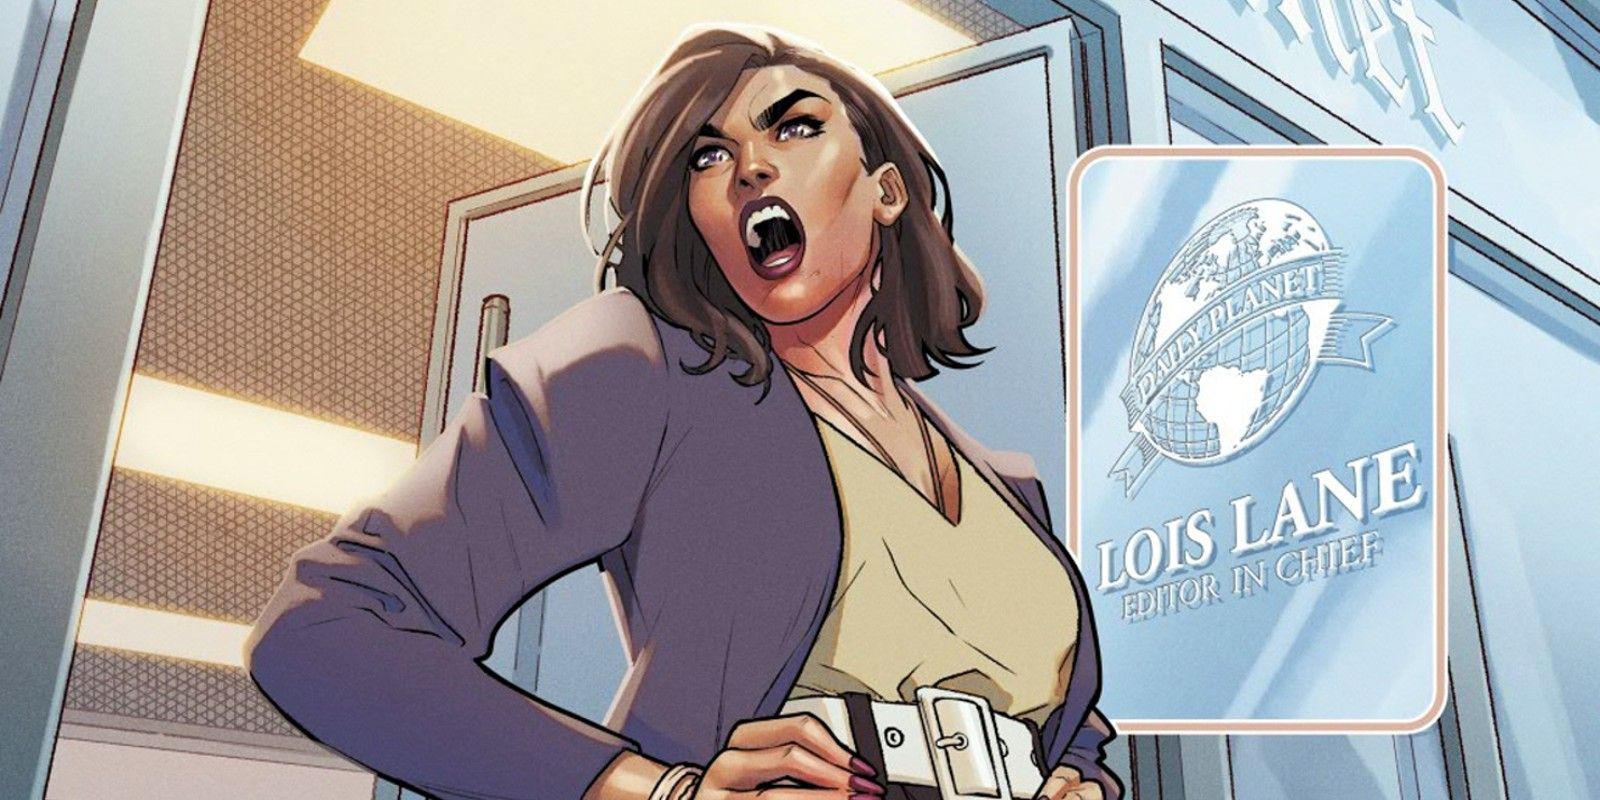 Lois Lane Yelling as Editor in Chief of Daily Planet